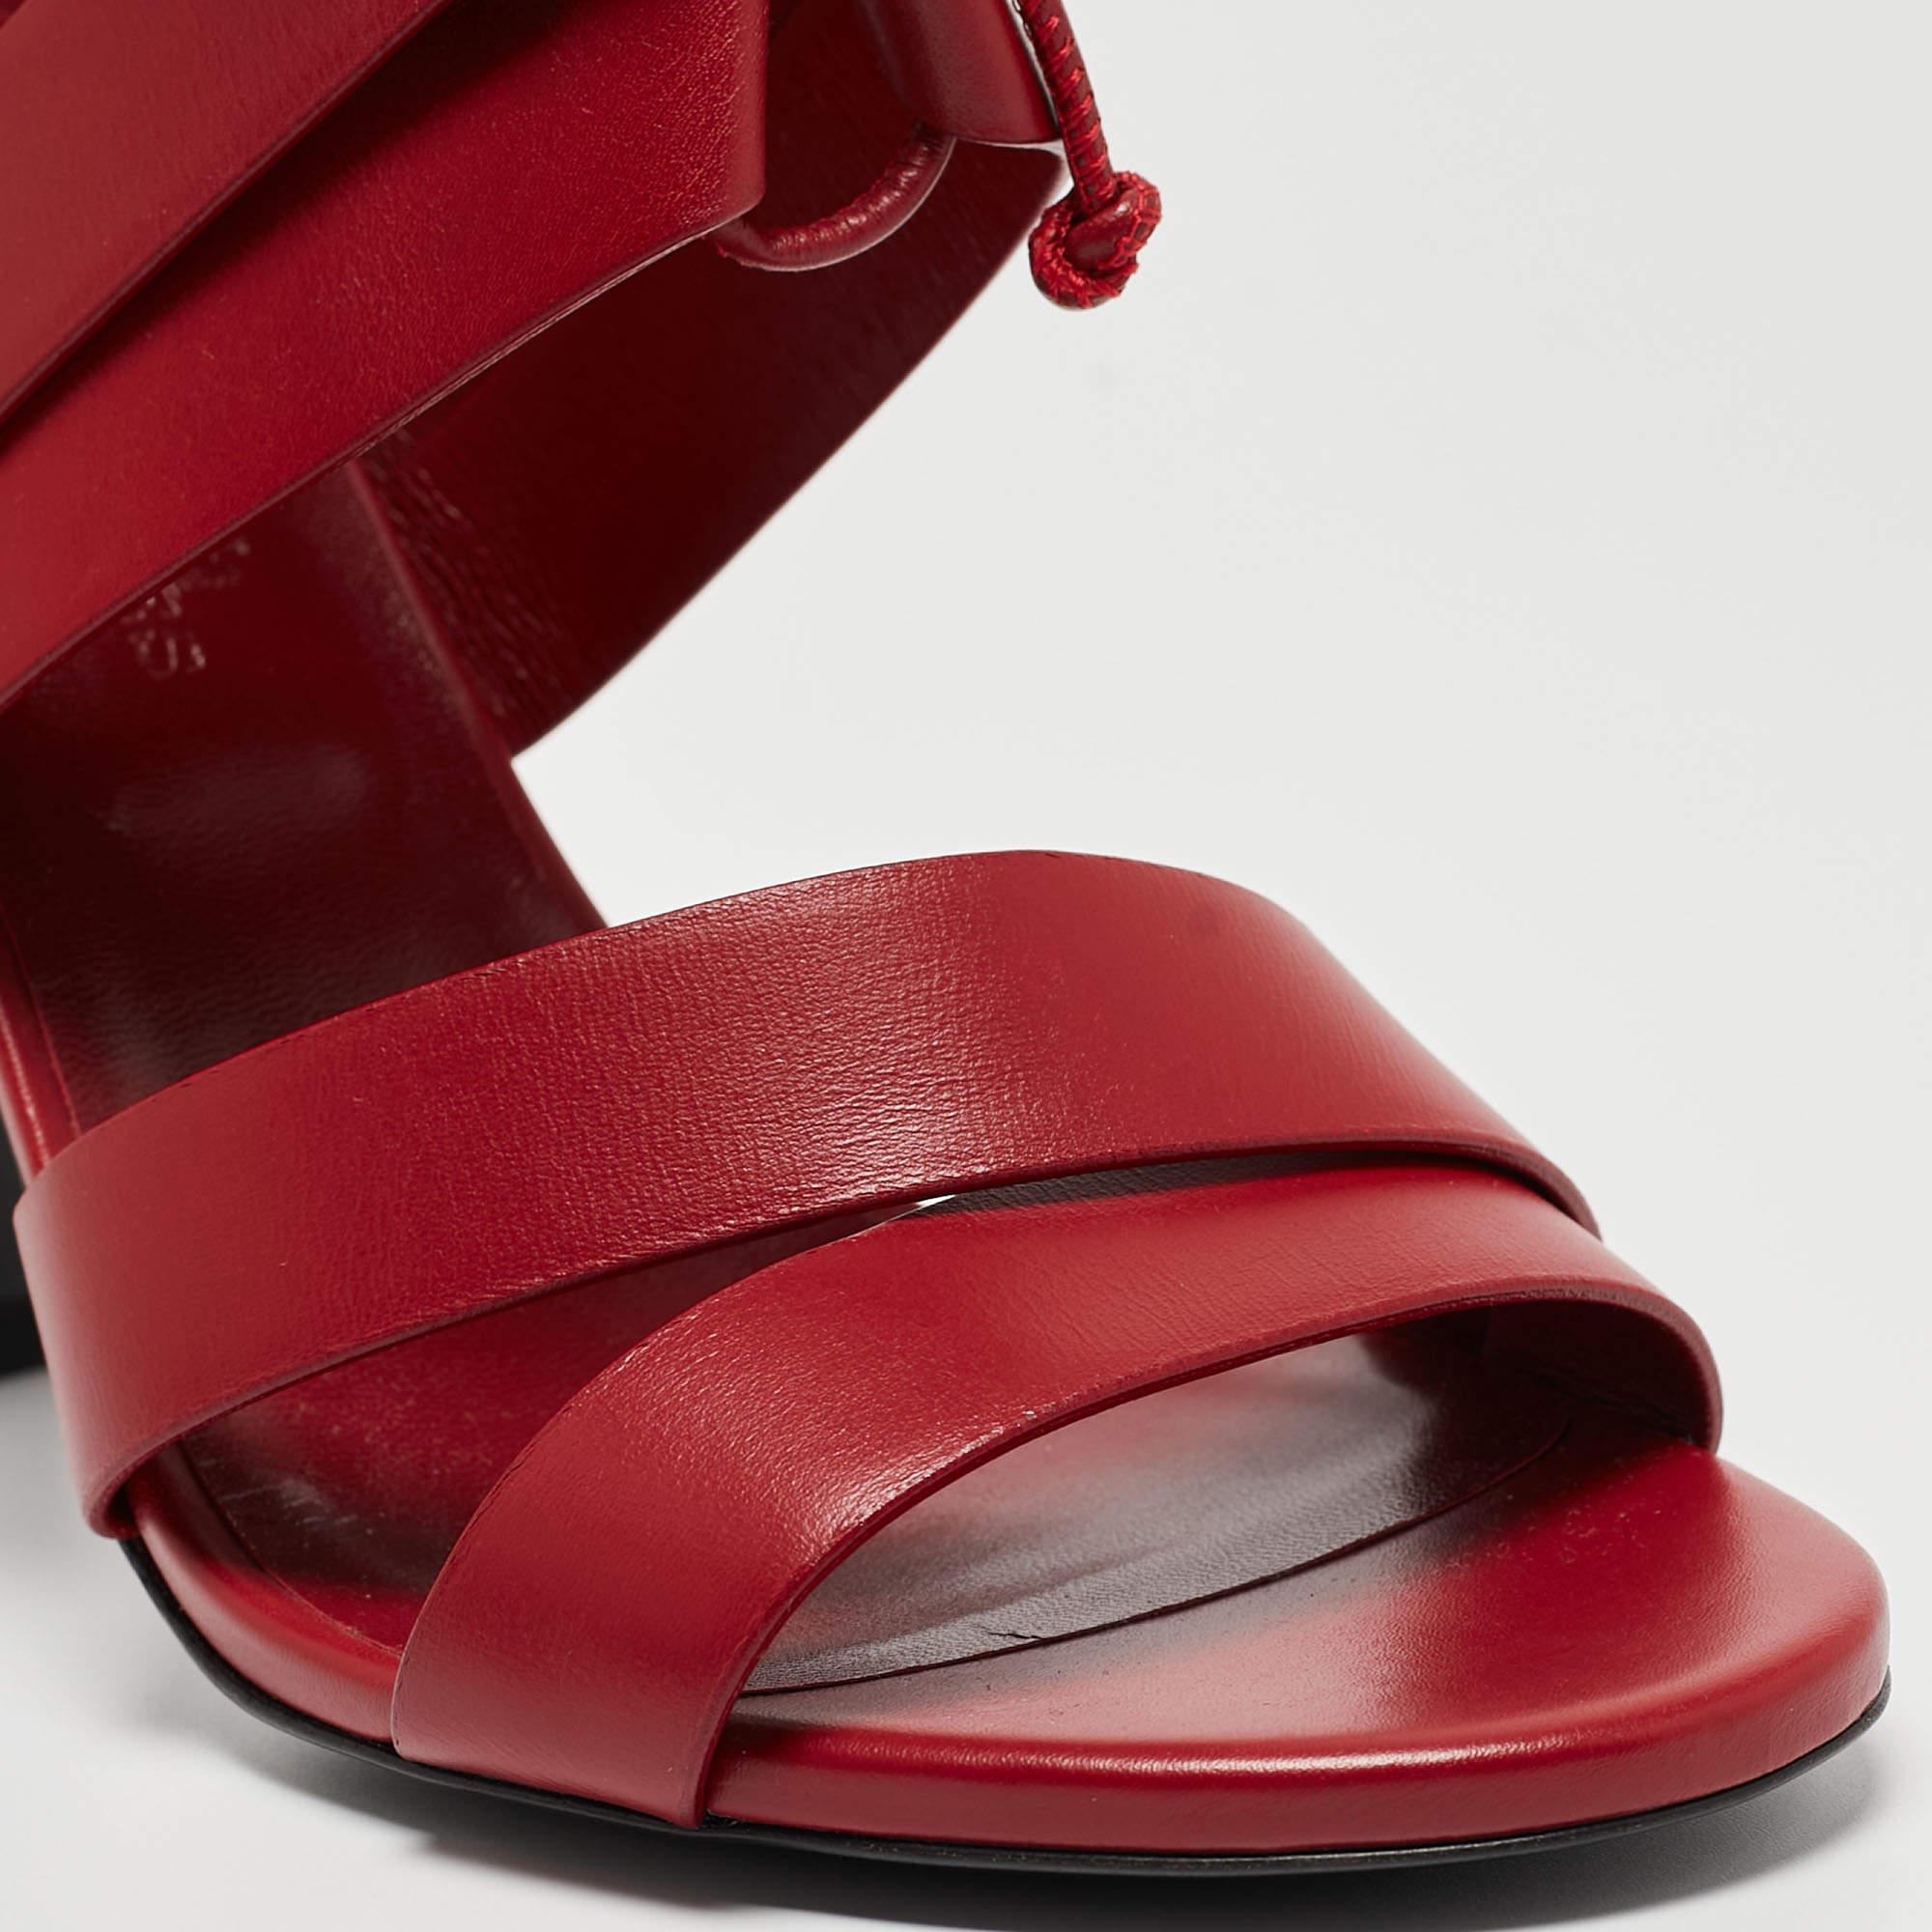 Hermes Dark Red Leather Ankle Strap Sandals Size 38 For Sale 2